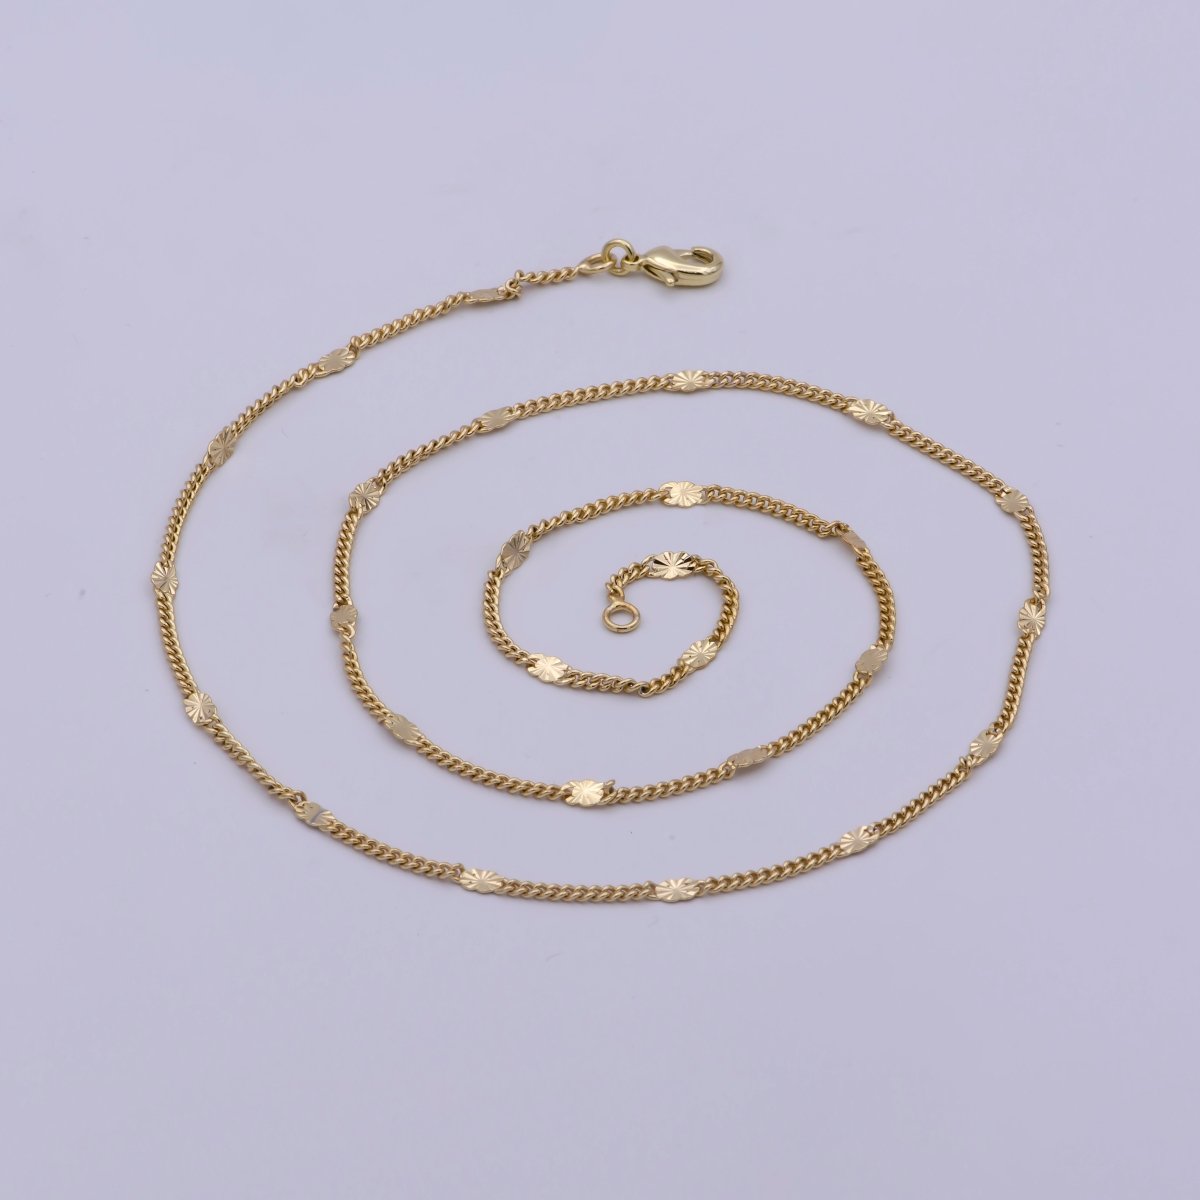 14k Gold Filled Curb Necklace Dainty Curb Necklace 15.5, 17.5, 19.5 inch long Ready to Wear Chain | WA-462 to WA-464 Clearance Pricing - DLUXCA